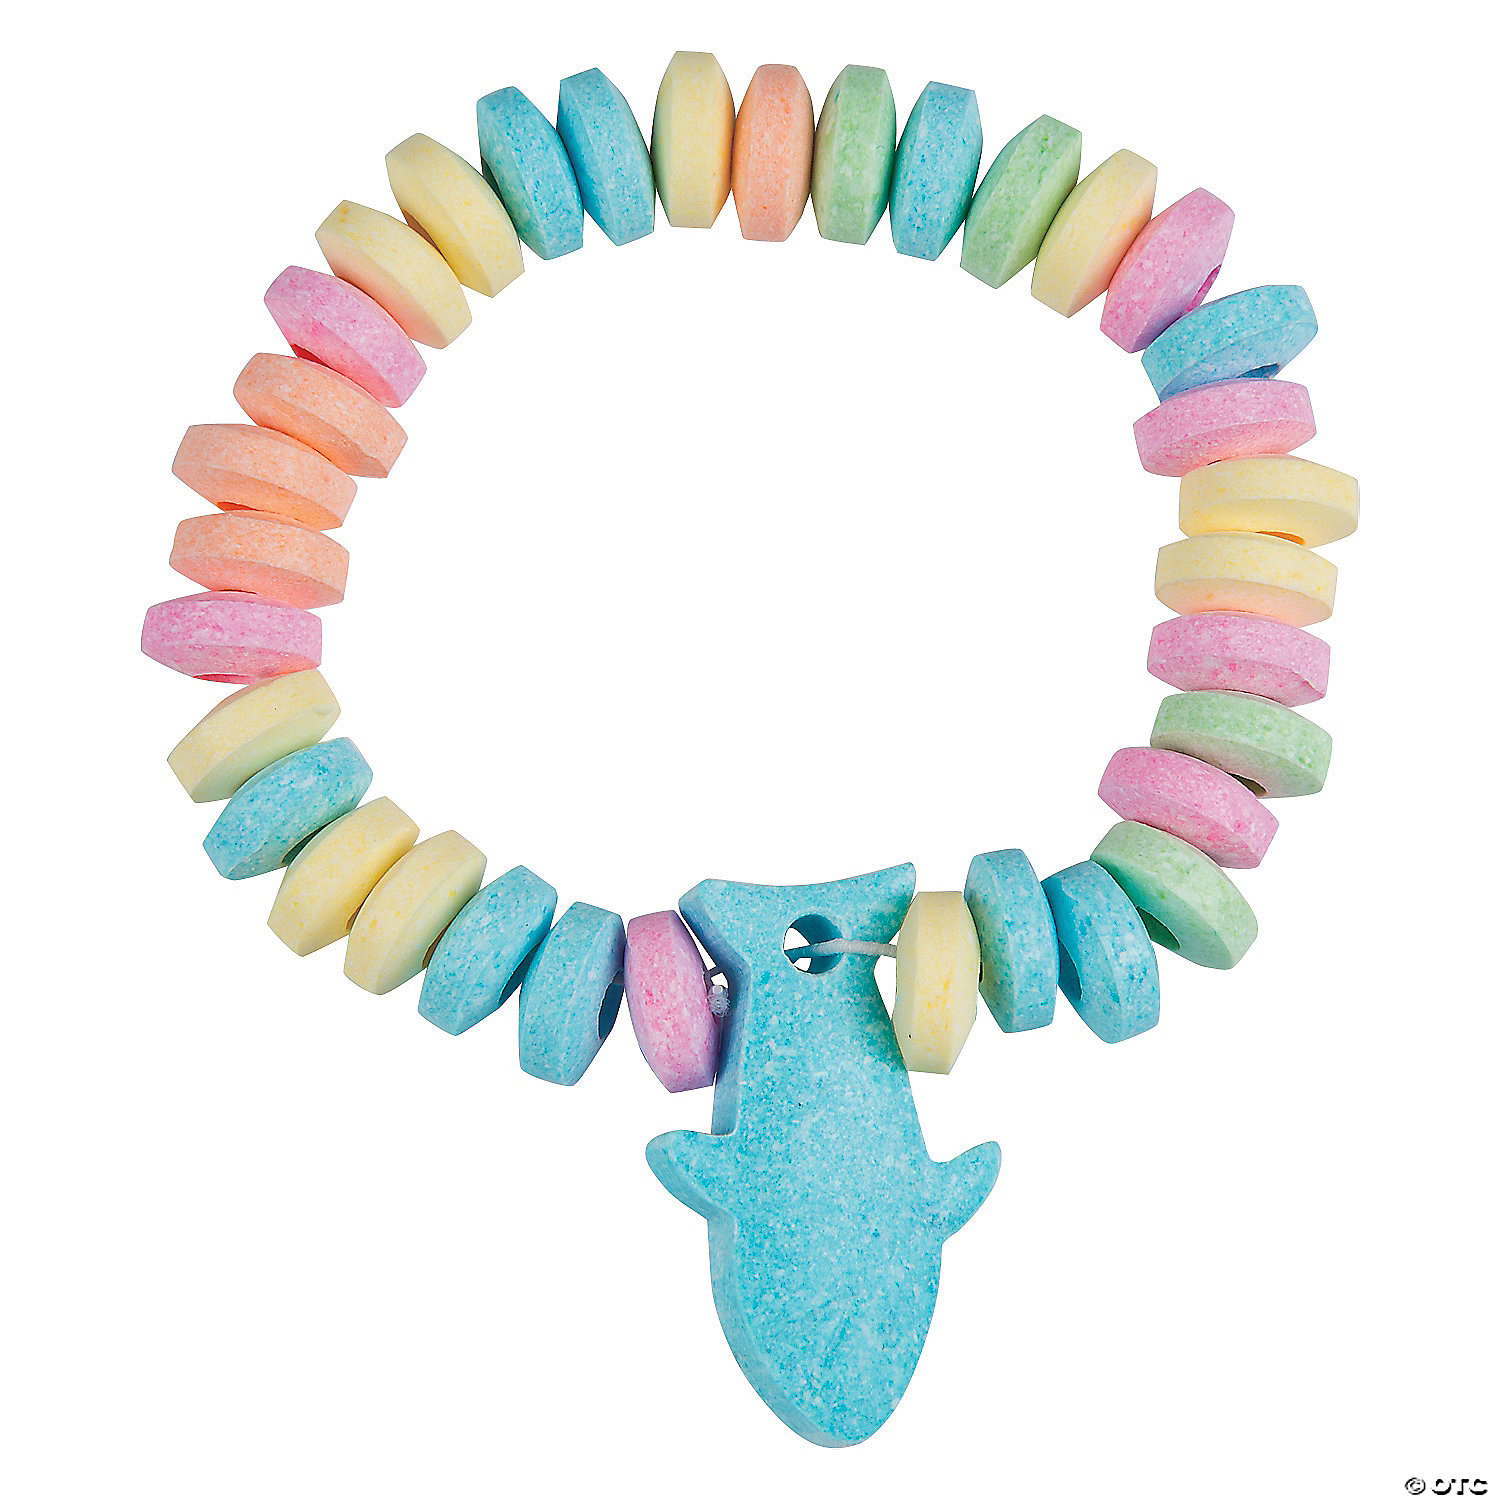 https://openaparty.com/open-a-party-shop/images/shark-shaped-hard-candy-bracelets-12-pc-~13684749.jpg